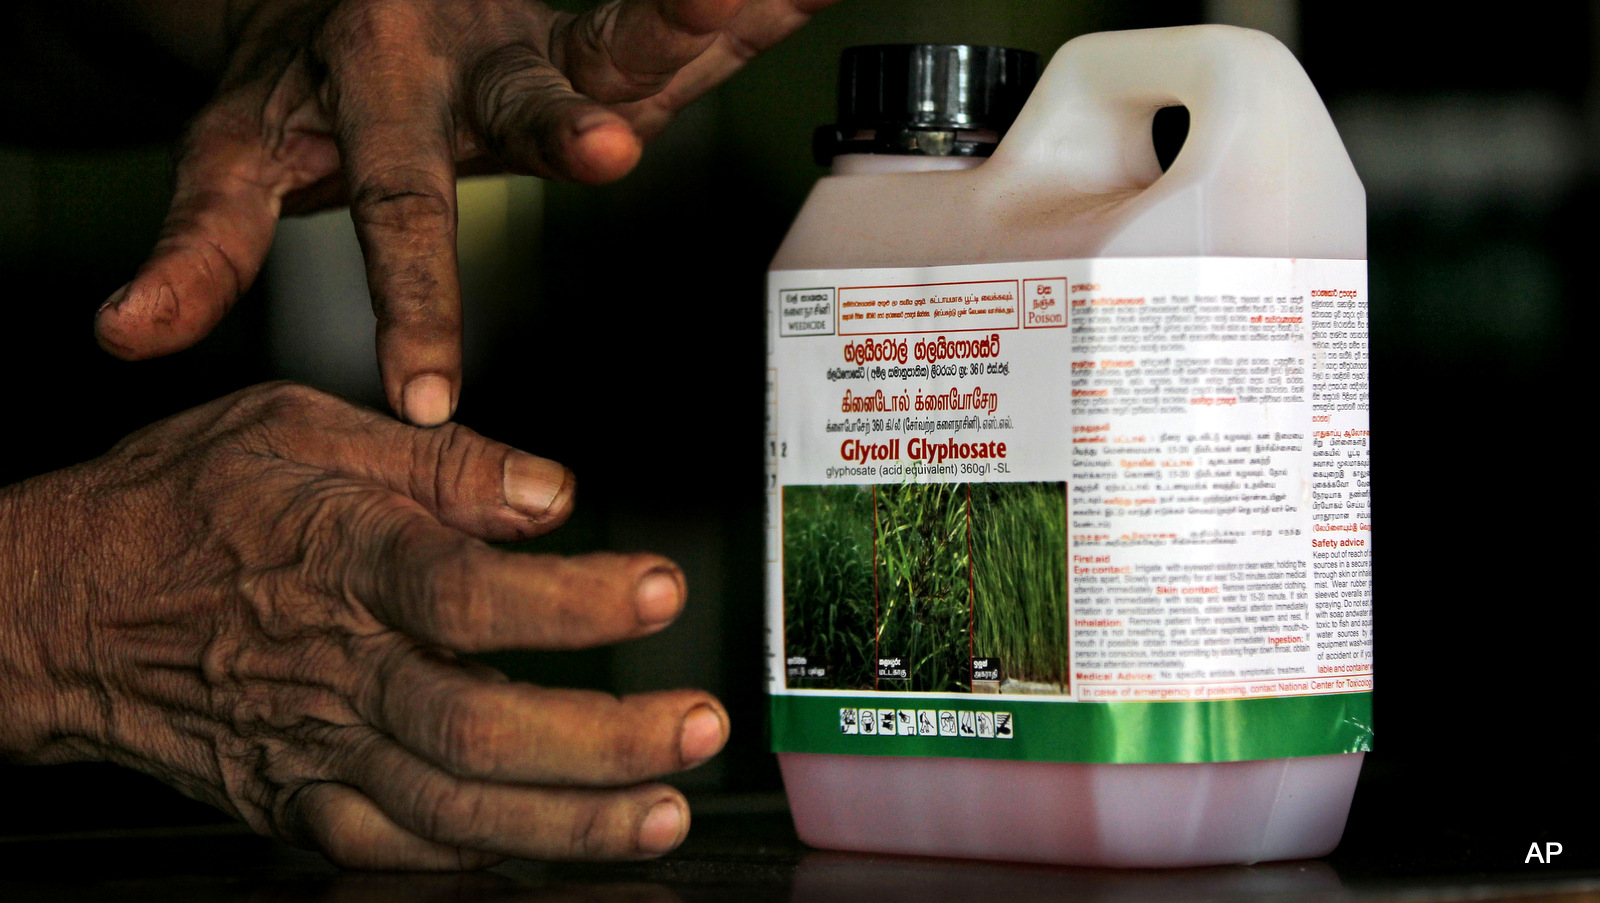 A Sri Lankan agrochemical vendor gives instructions on how to use Glyphosate